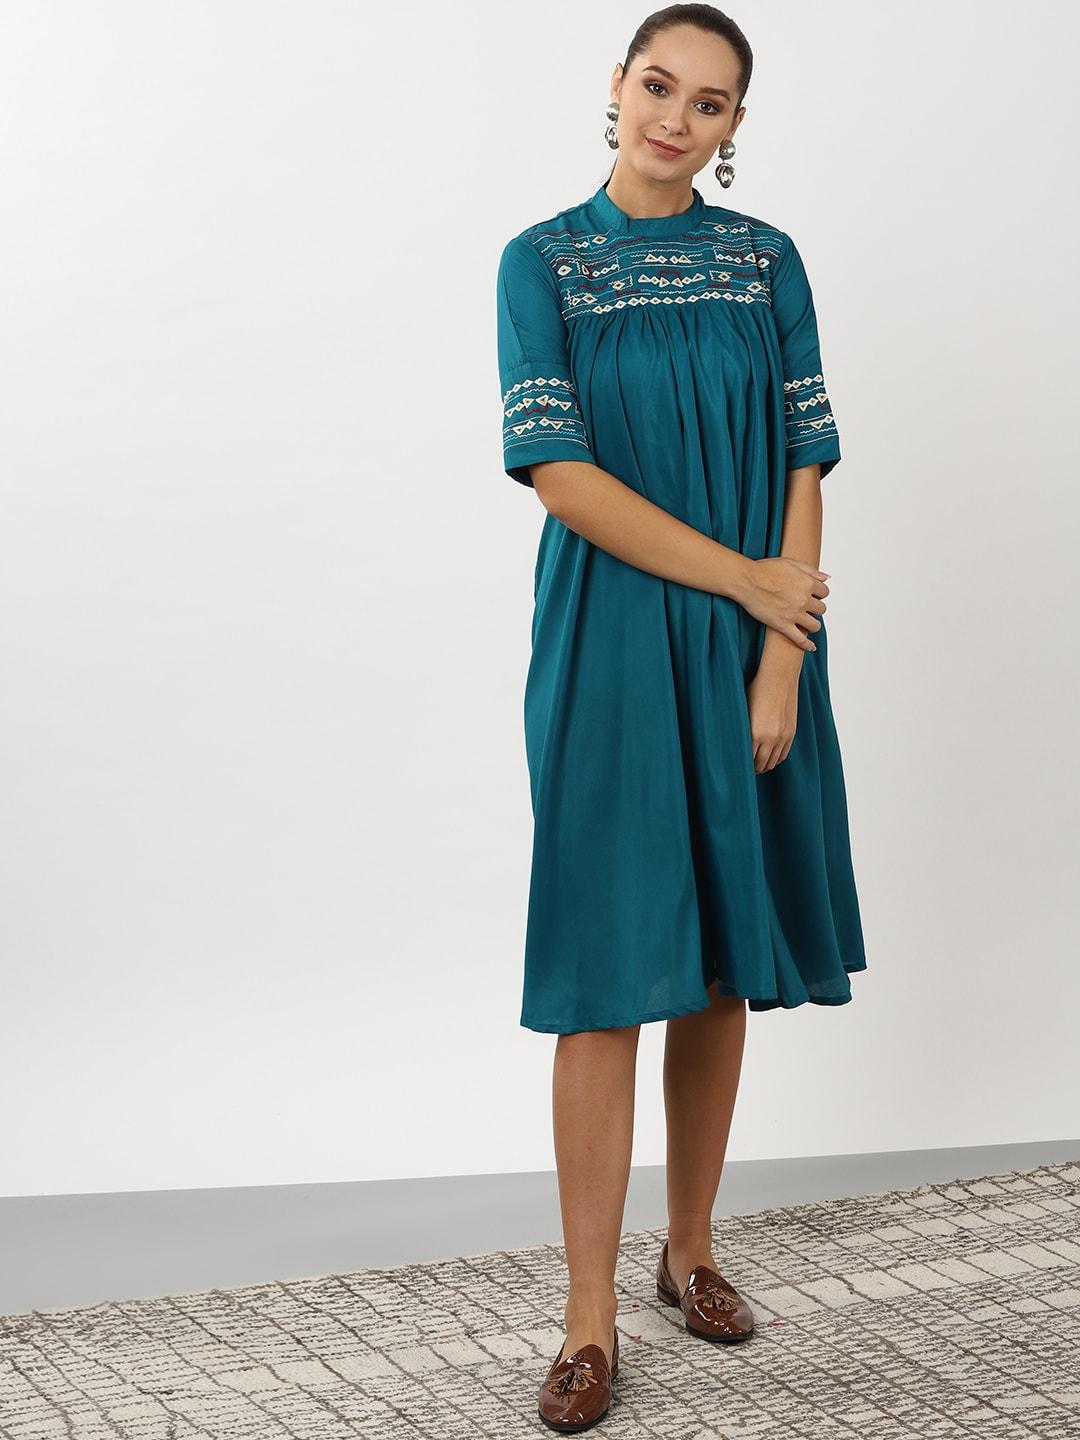 sangria-teal-blue-ethnic-motifs-embroidered-ethnic-empire-midi-dress